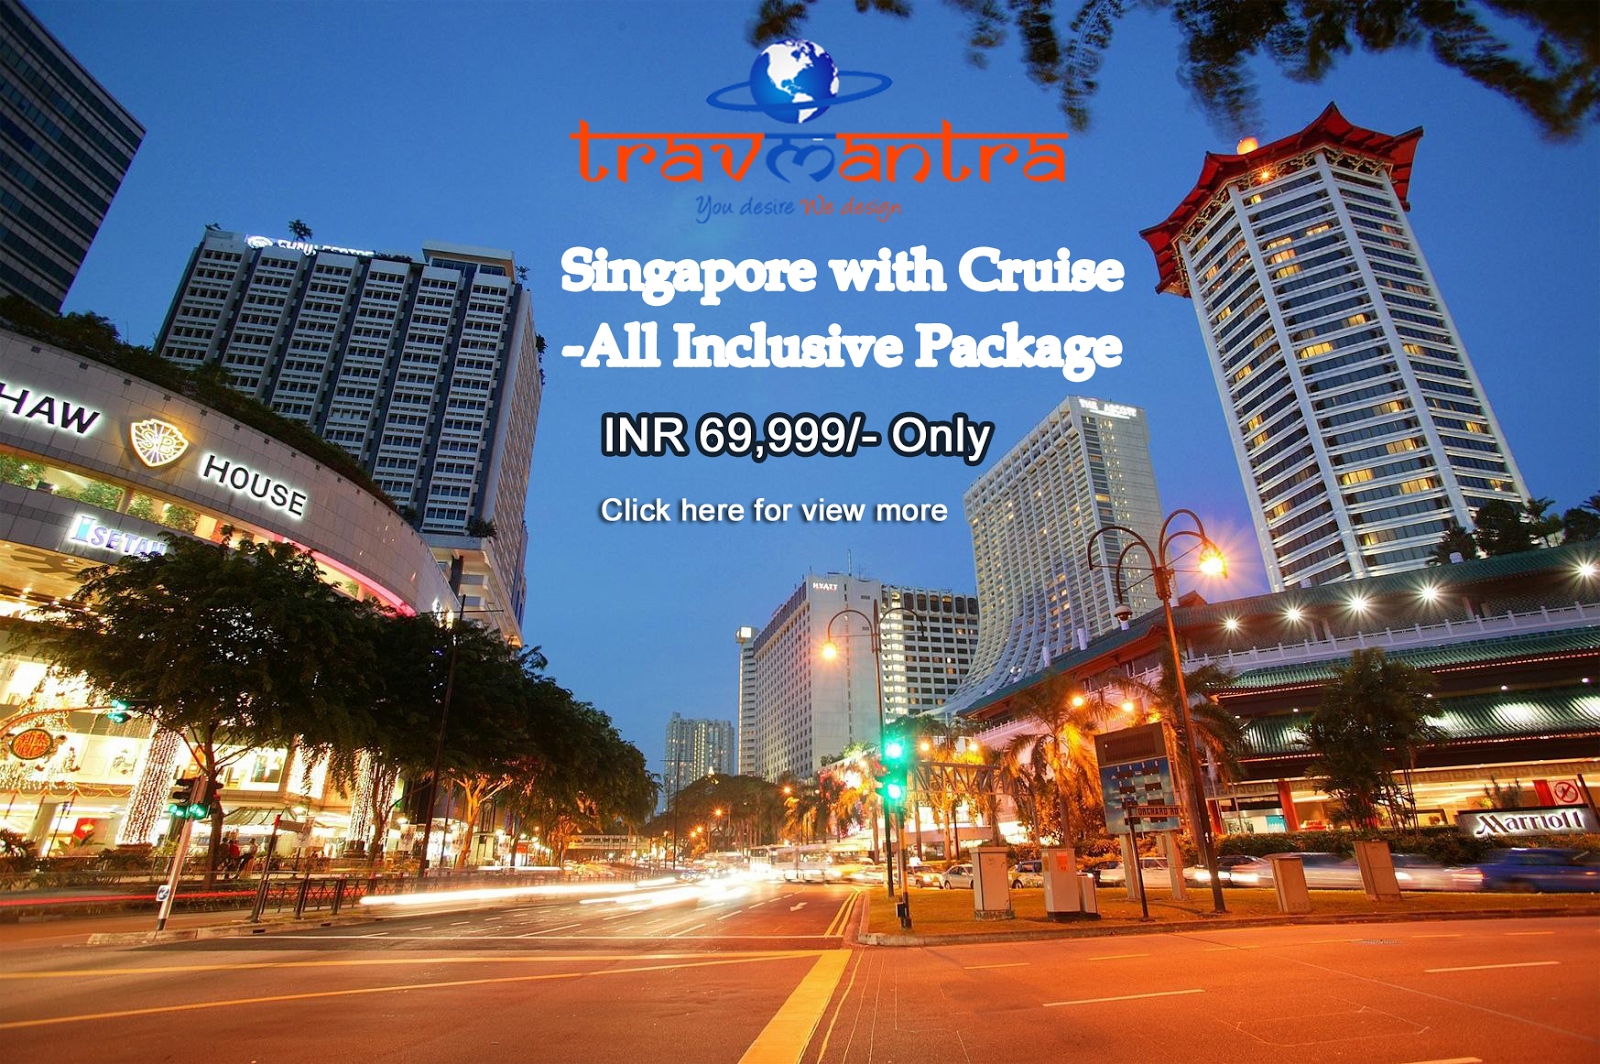 Singapore with Cruise - All Inclusive Package